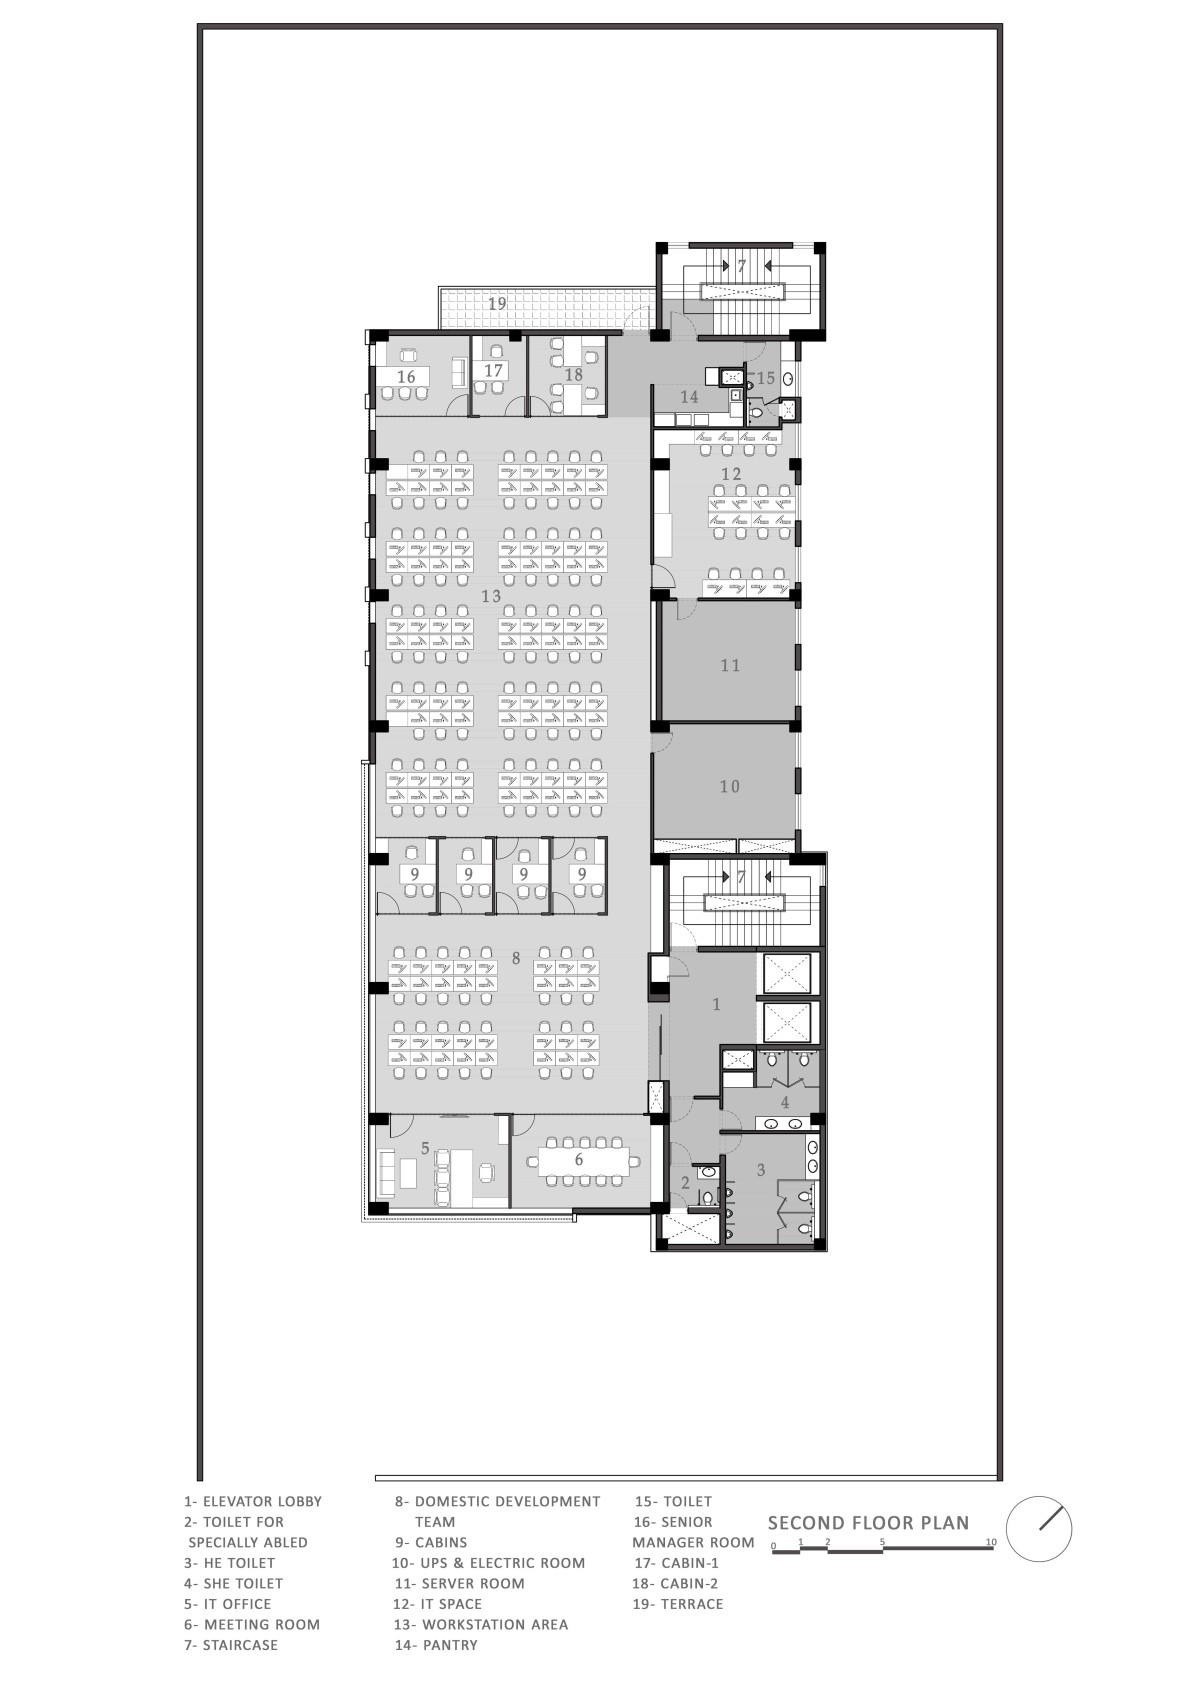 Second floor plan of Outline by Design Three Sixty